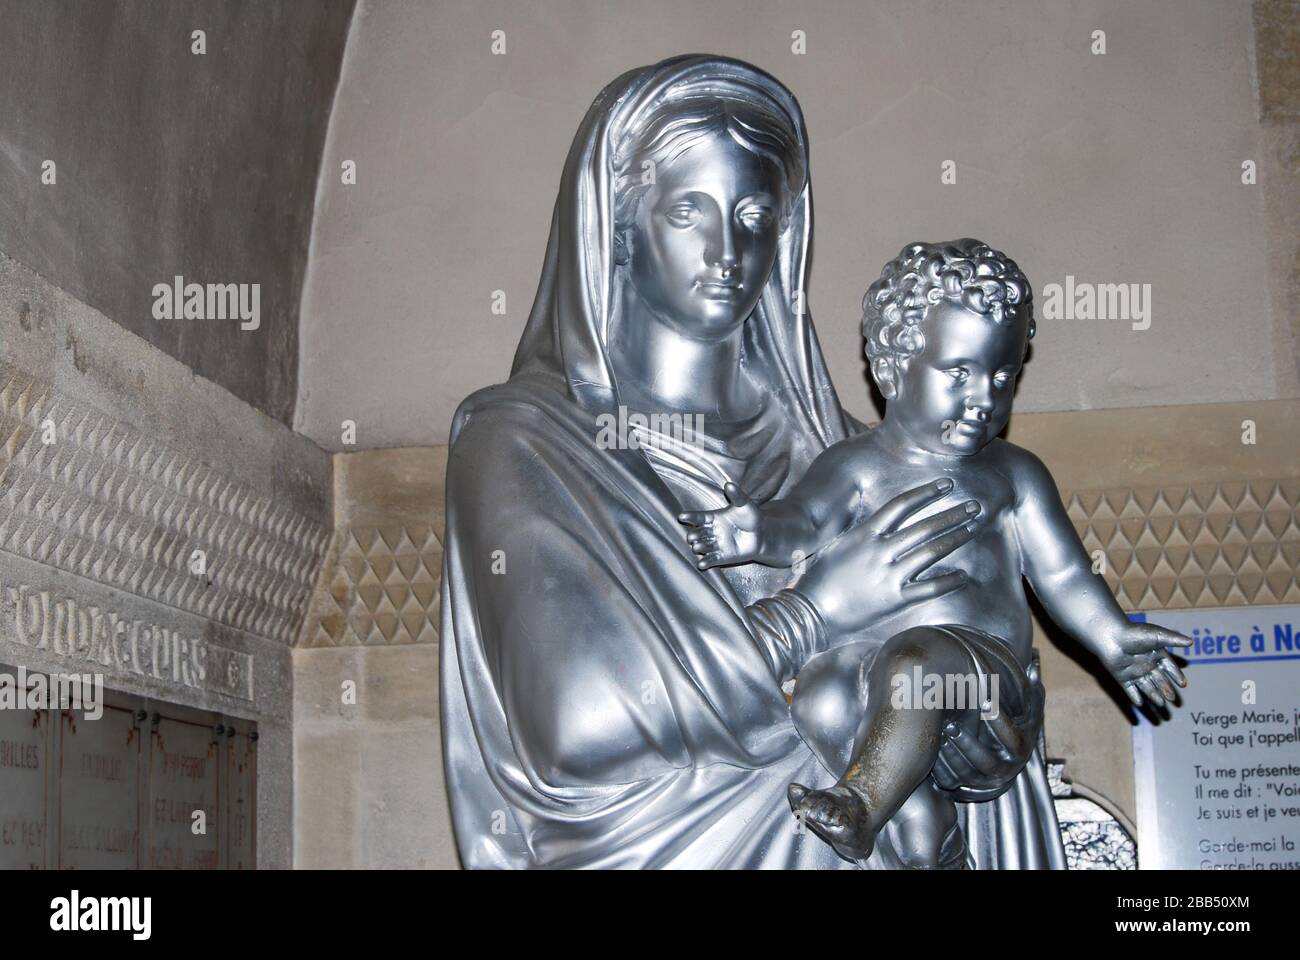 Statue of the Virgin Mary / Vierge Marie with baby Jesus, in the crypt, near the burner in the Basilique Notre-Dame de la Garde, la Bonne Mère Stock Photo